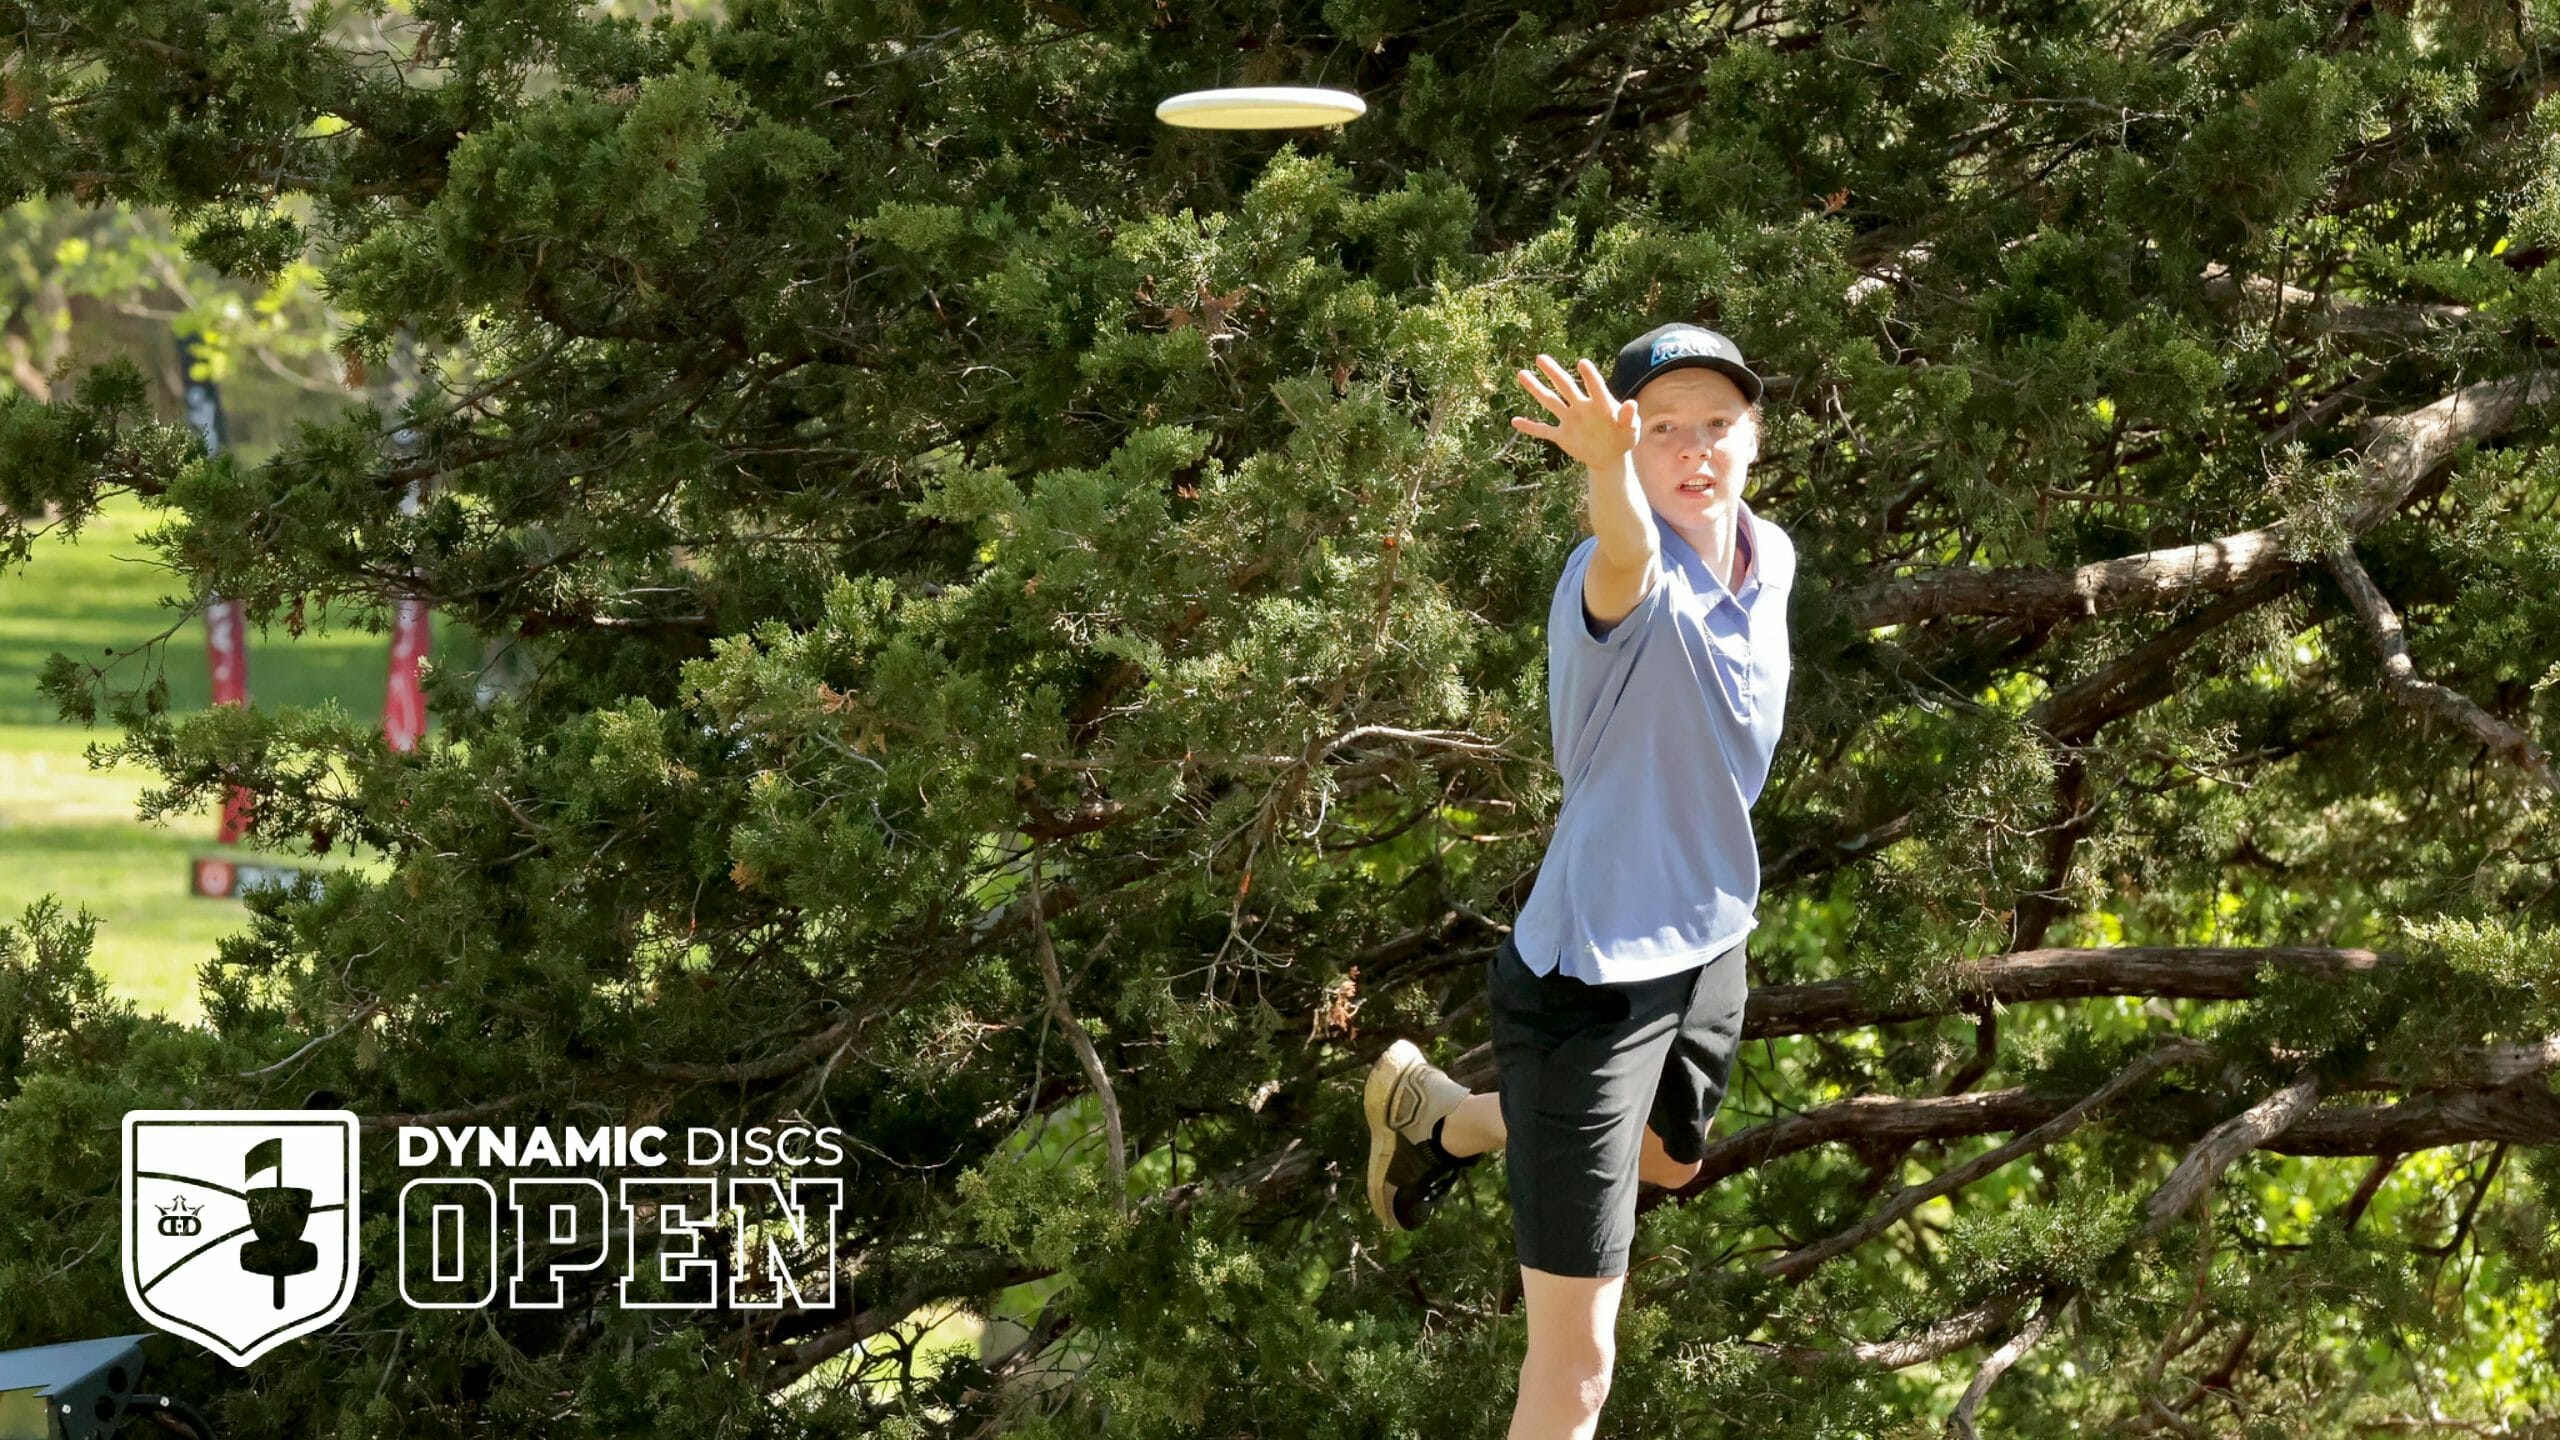 DDO King, Allen In Two Horse Race To Title DISC GOLF NEWS FEED